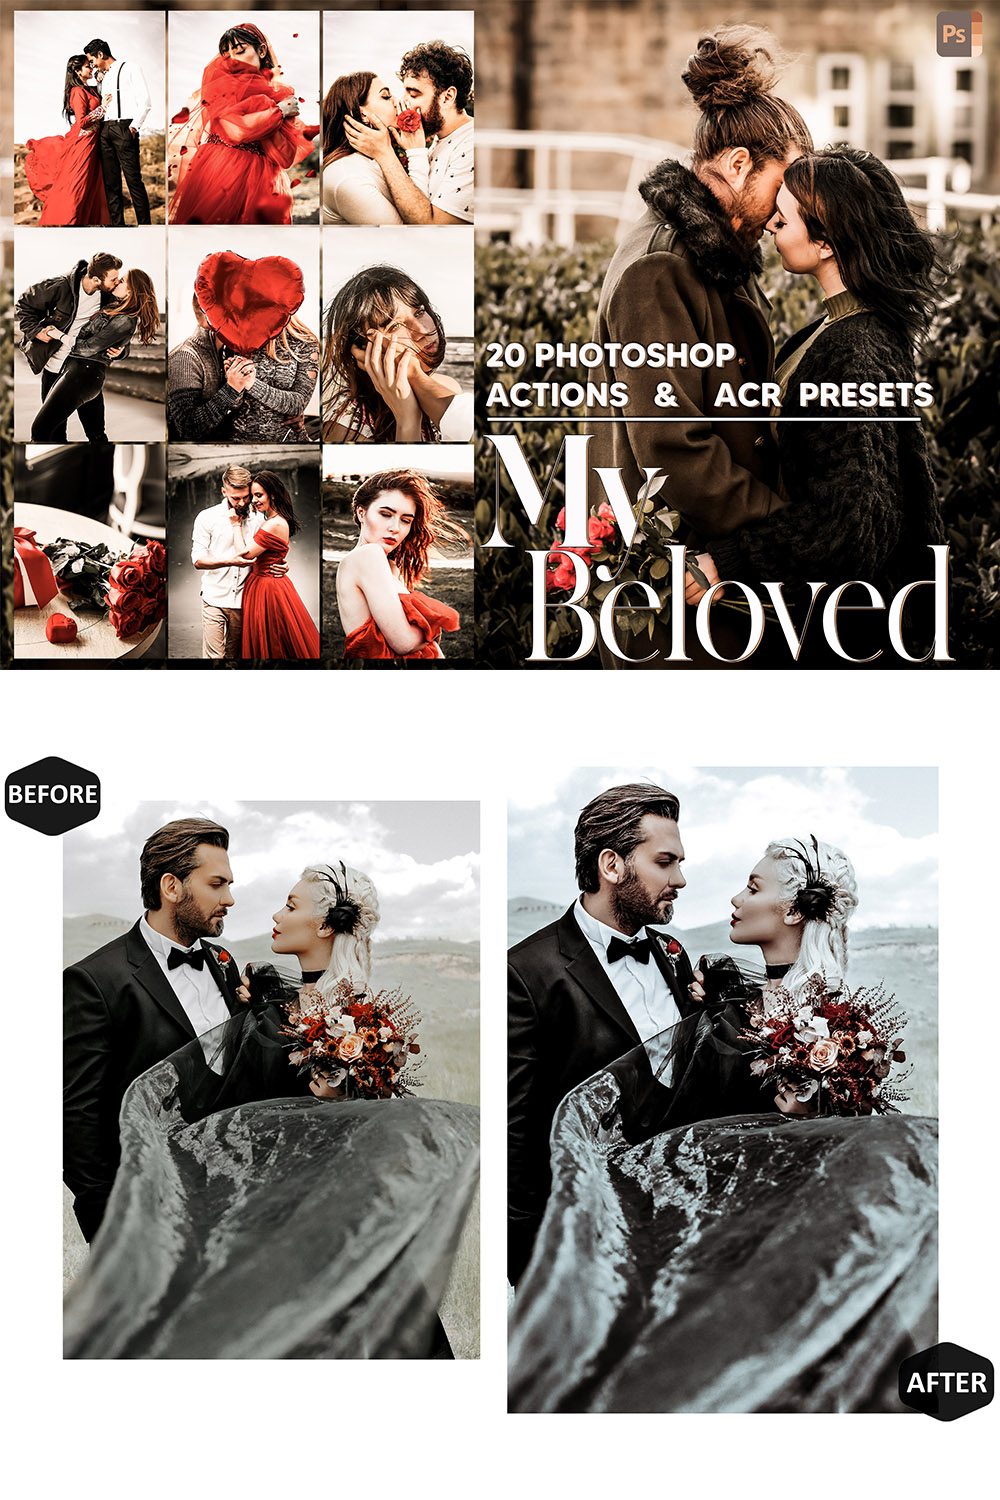 20 Photoshop Actions, My Beloved Ps Action, Love ACR Preset, Valentine Ps Filter, Atn Pictures And style Theme For Instagram, Blogger pinterest preview image.